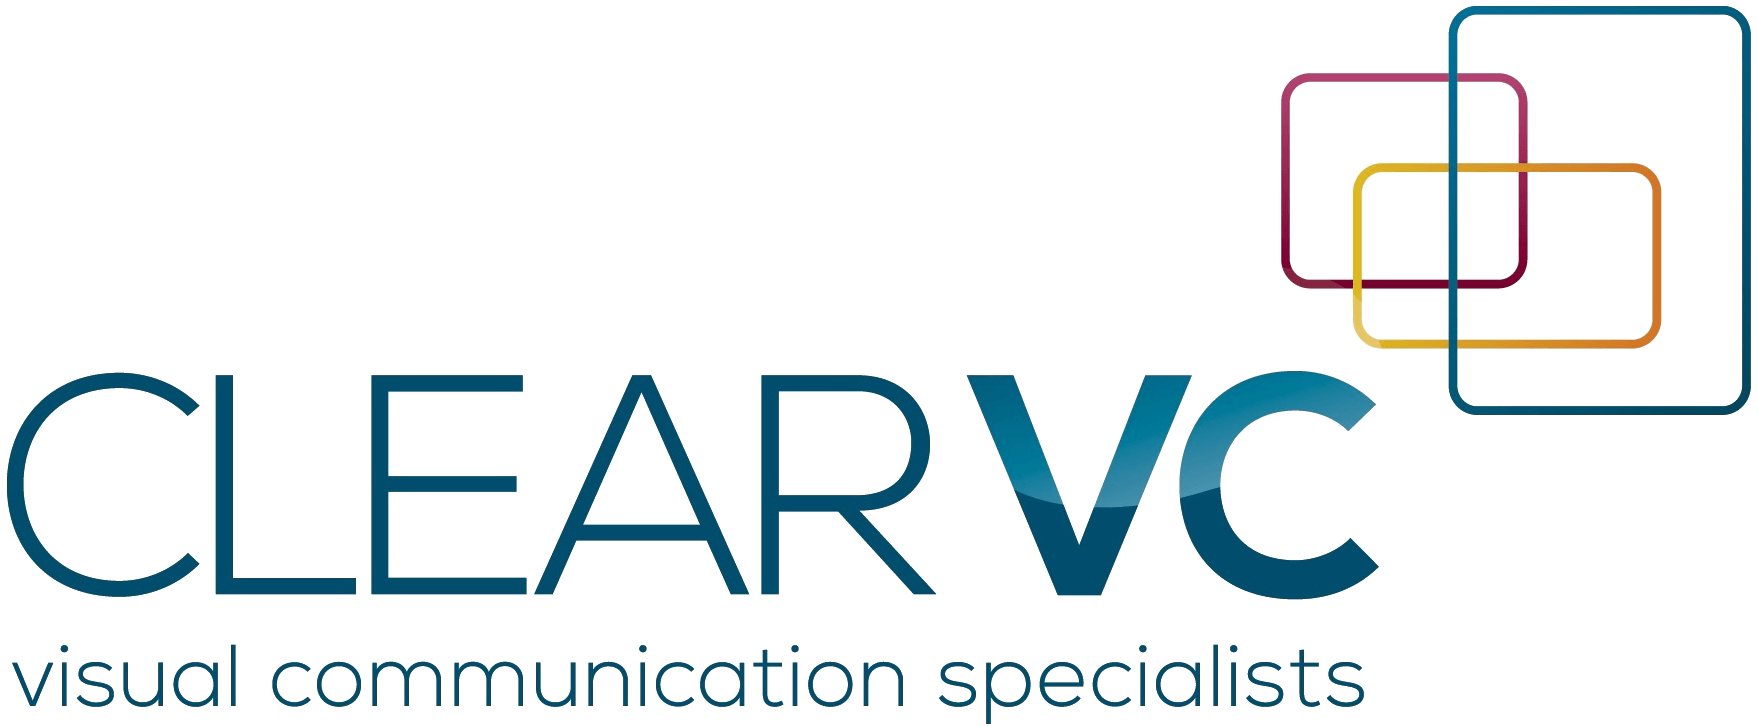 ClearVC